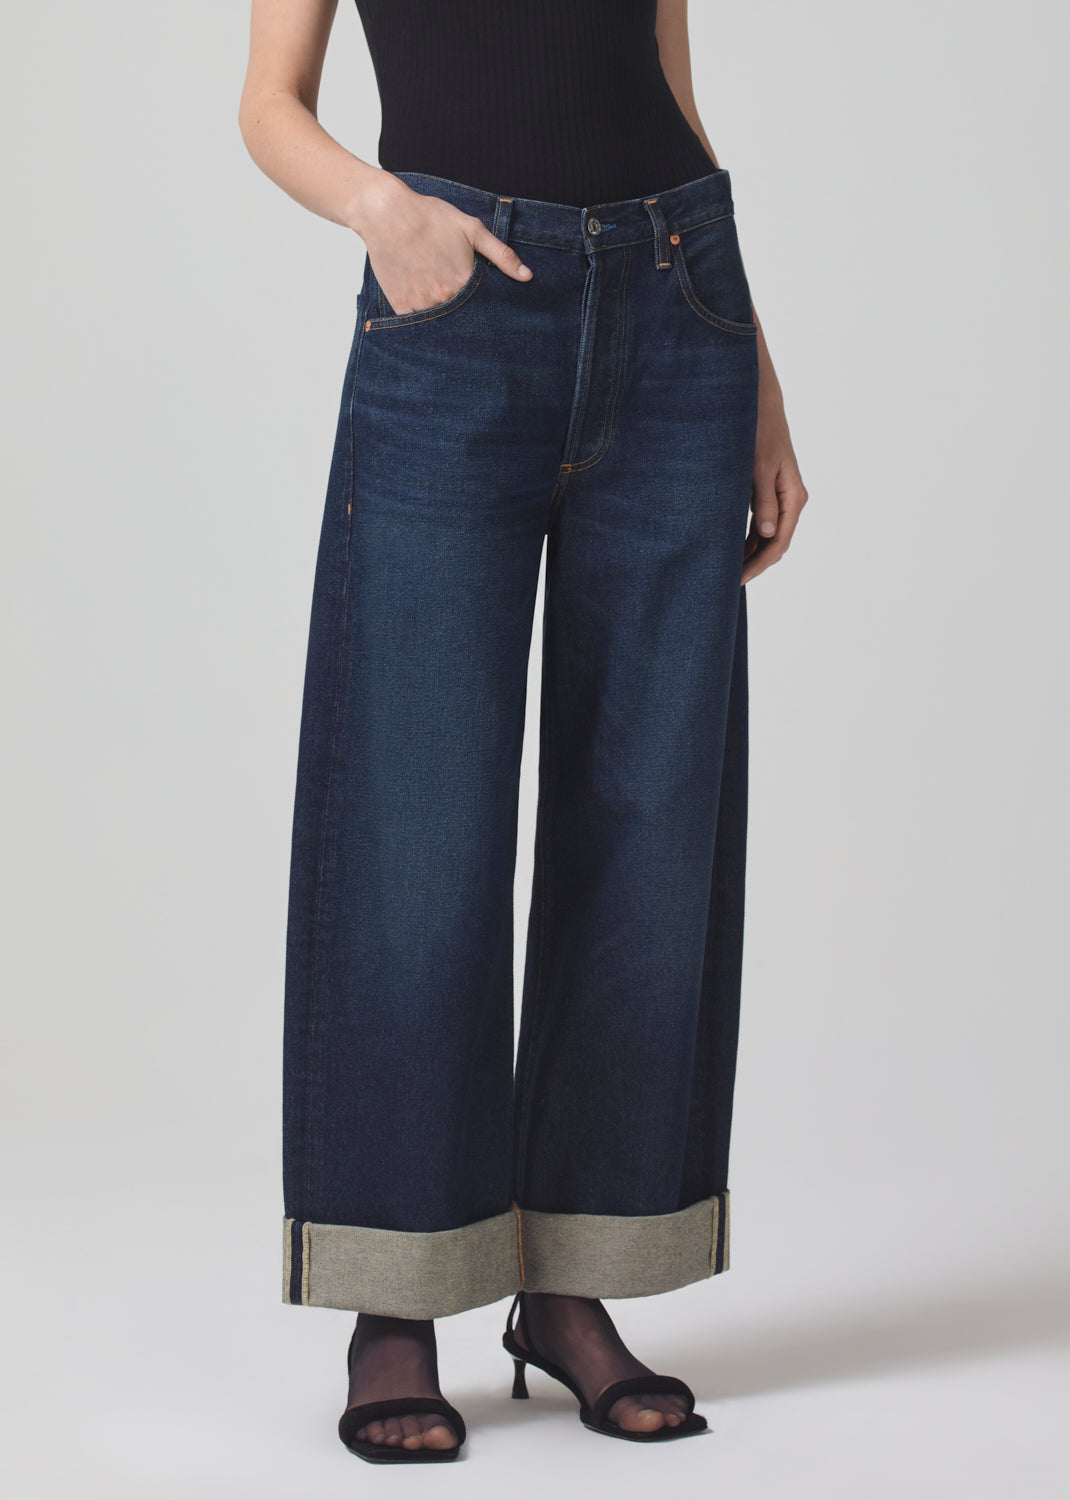 Ayla Baggy Cuffed Crop in Bravo – Citizens of Humanity